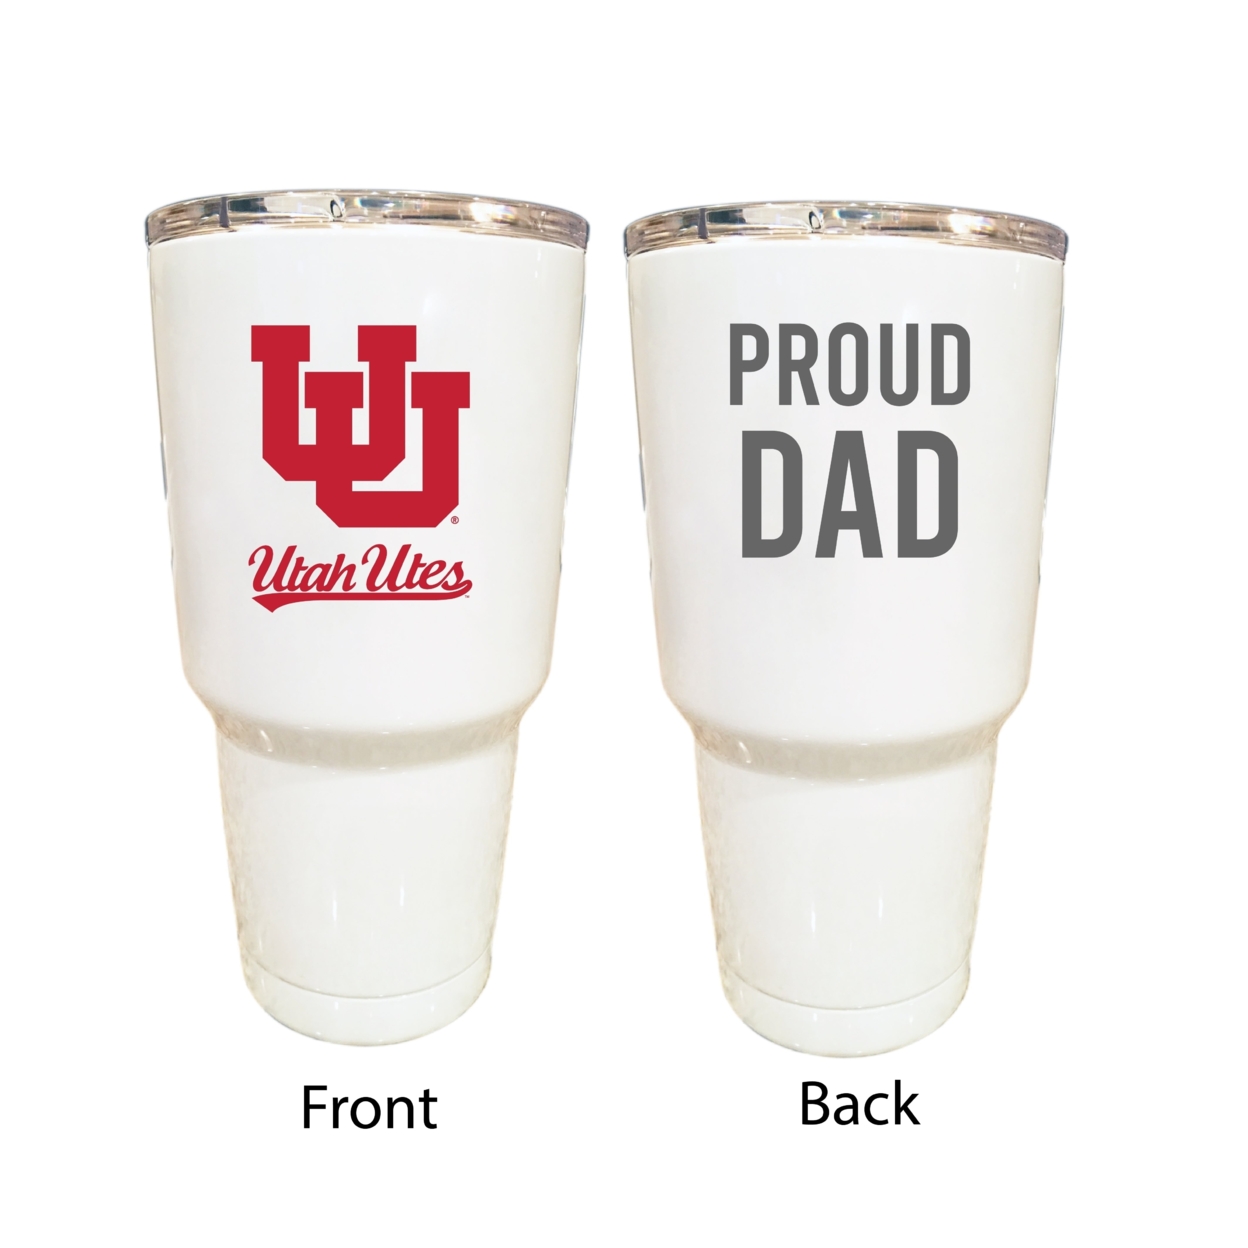 Utah Utes Proud Dad 24 Oz Insulated Stainless Steel Tumblers Choose Your Color.